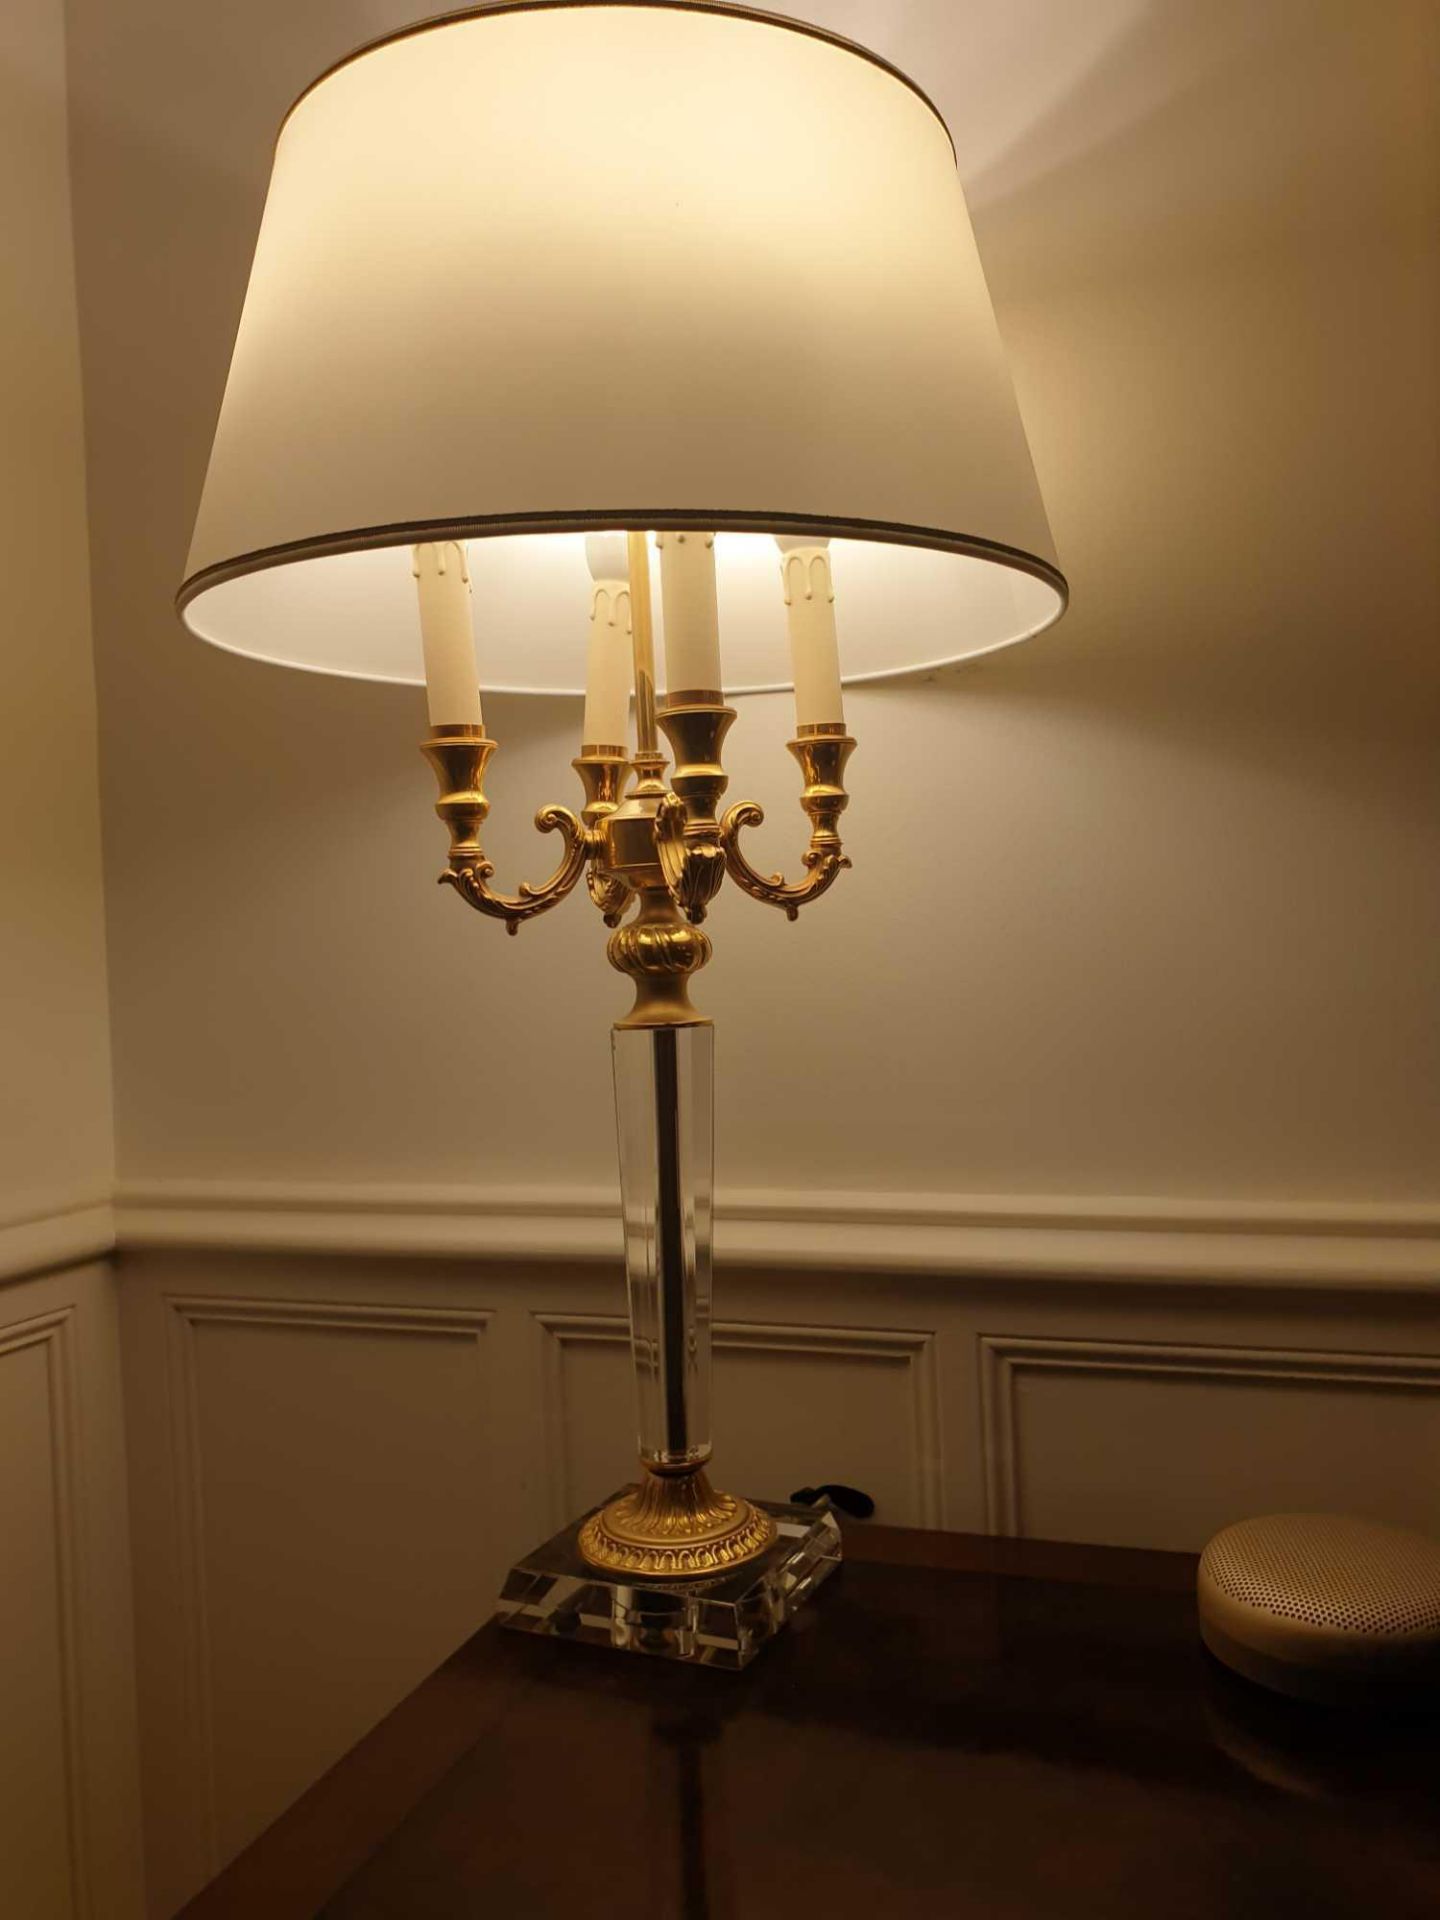 Laudarte Crystal Table Lamp Four Arm Bronze Lost-Wax Casting Antique Gilt Bronze Base And Column And - Image 2 of 2